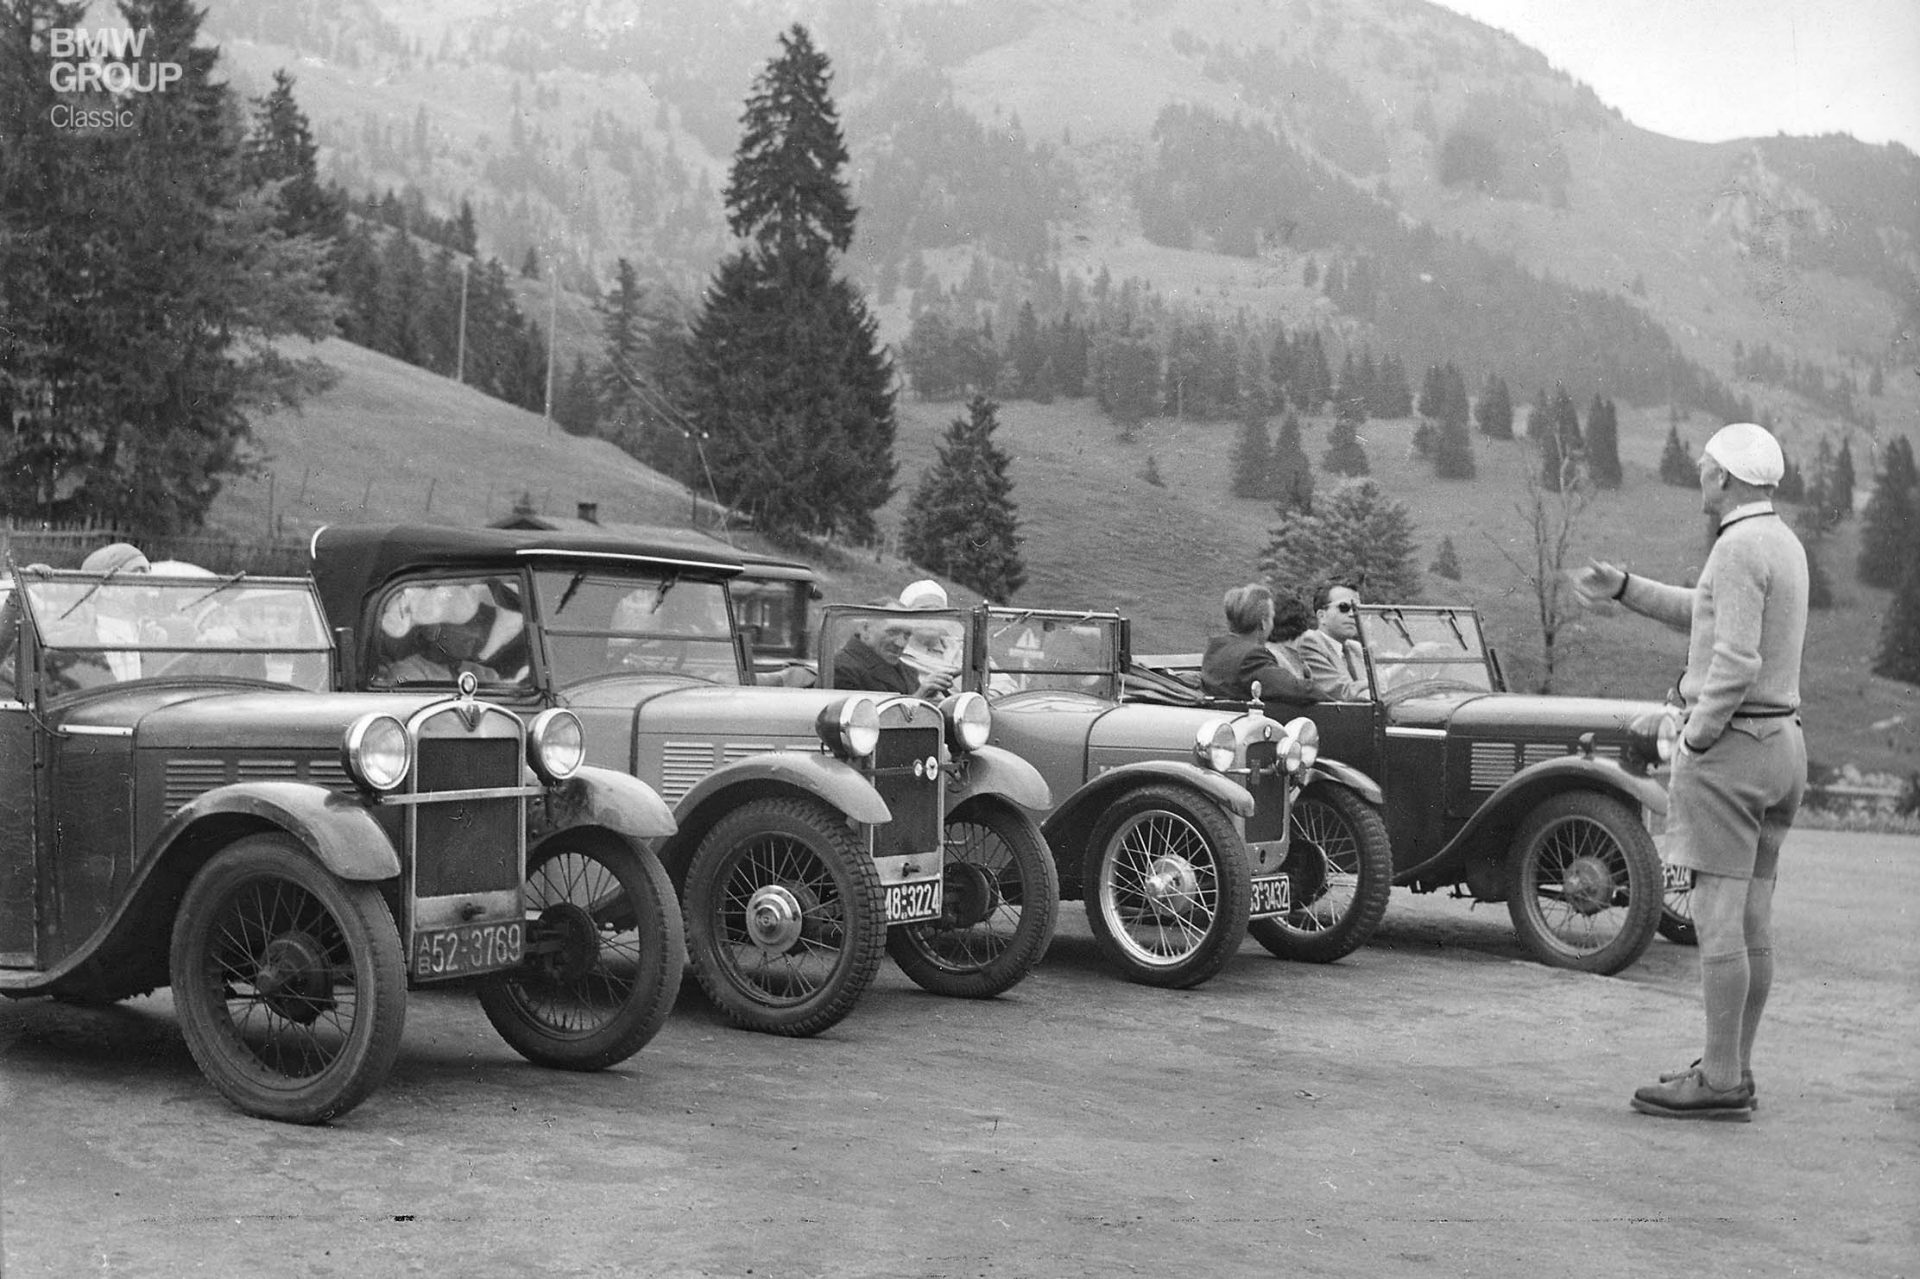 The very first BMW car quickly attracted a handsome following. Pictured here are a group of models on an outing in 1950.